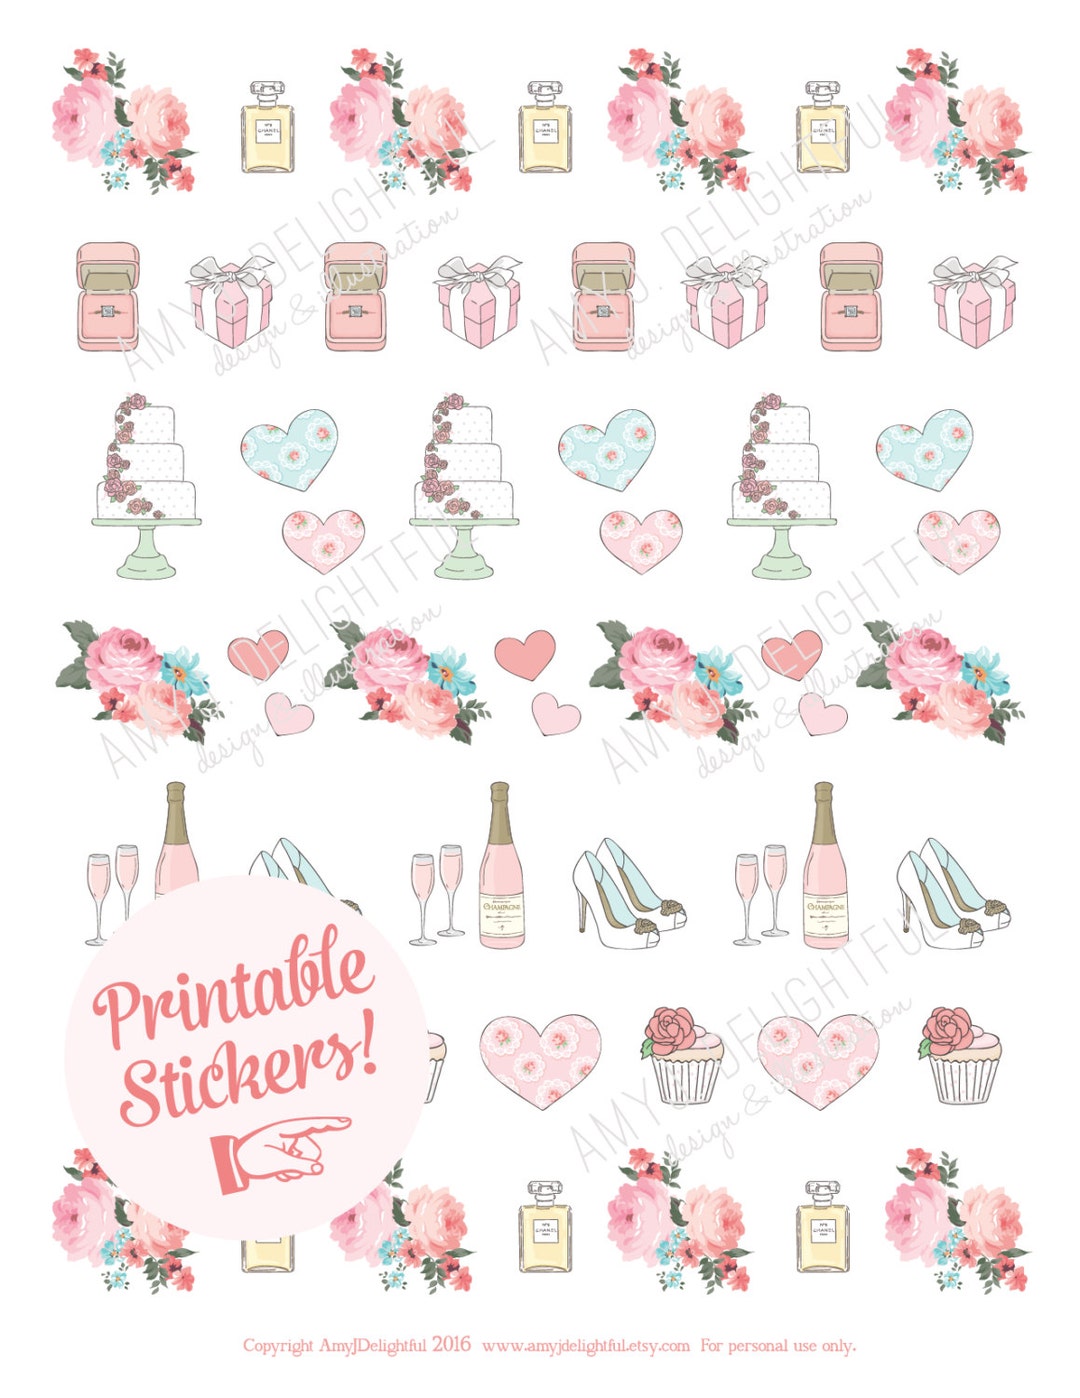 Tiny Heart Stickers 1/4 Each, Heart Planner Stickers, Love Stickers for  Planners and Calendars and More, Color Options Available 